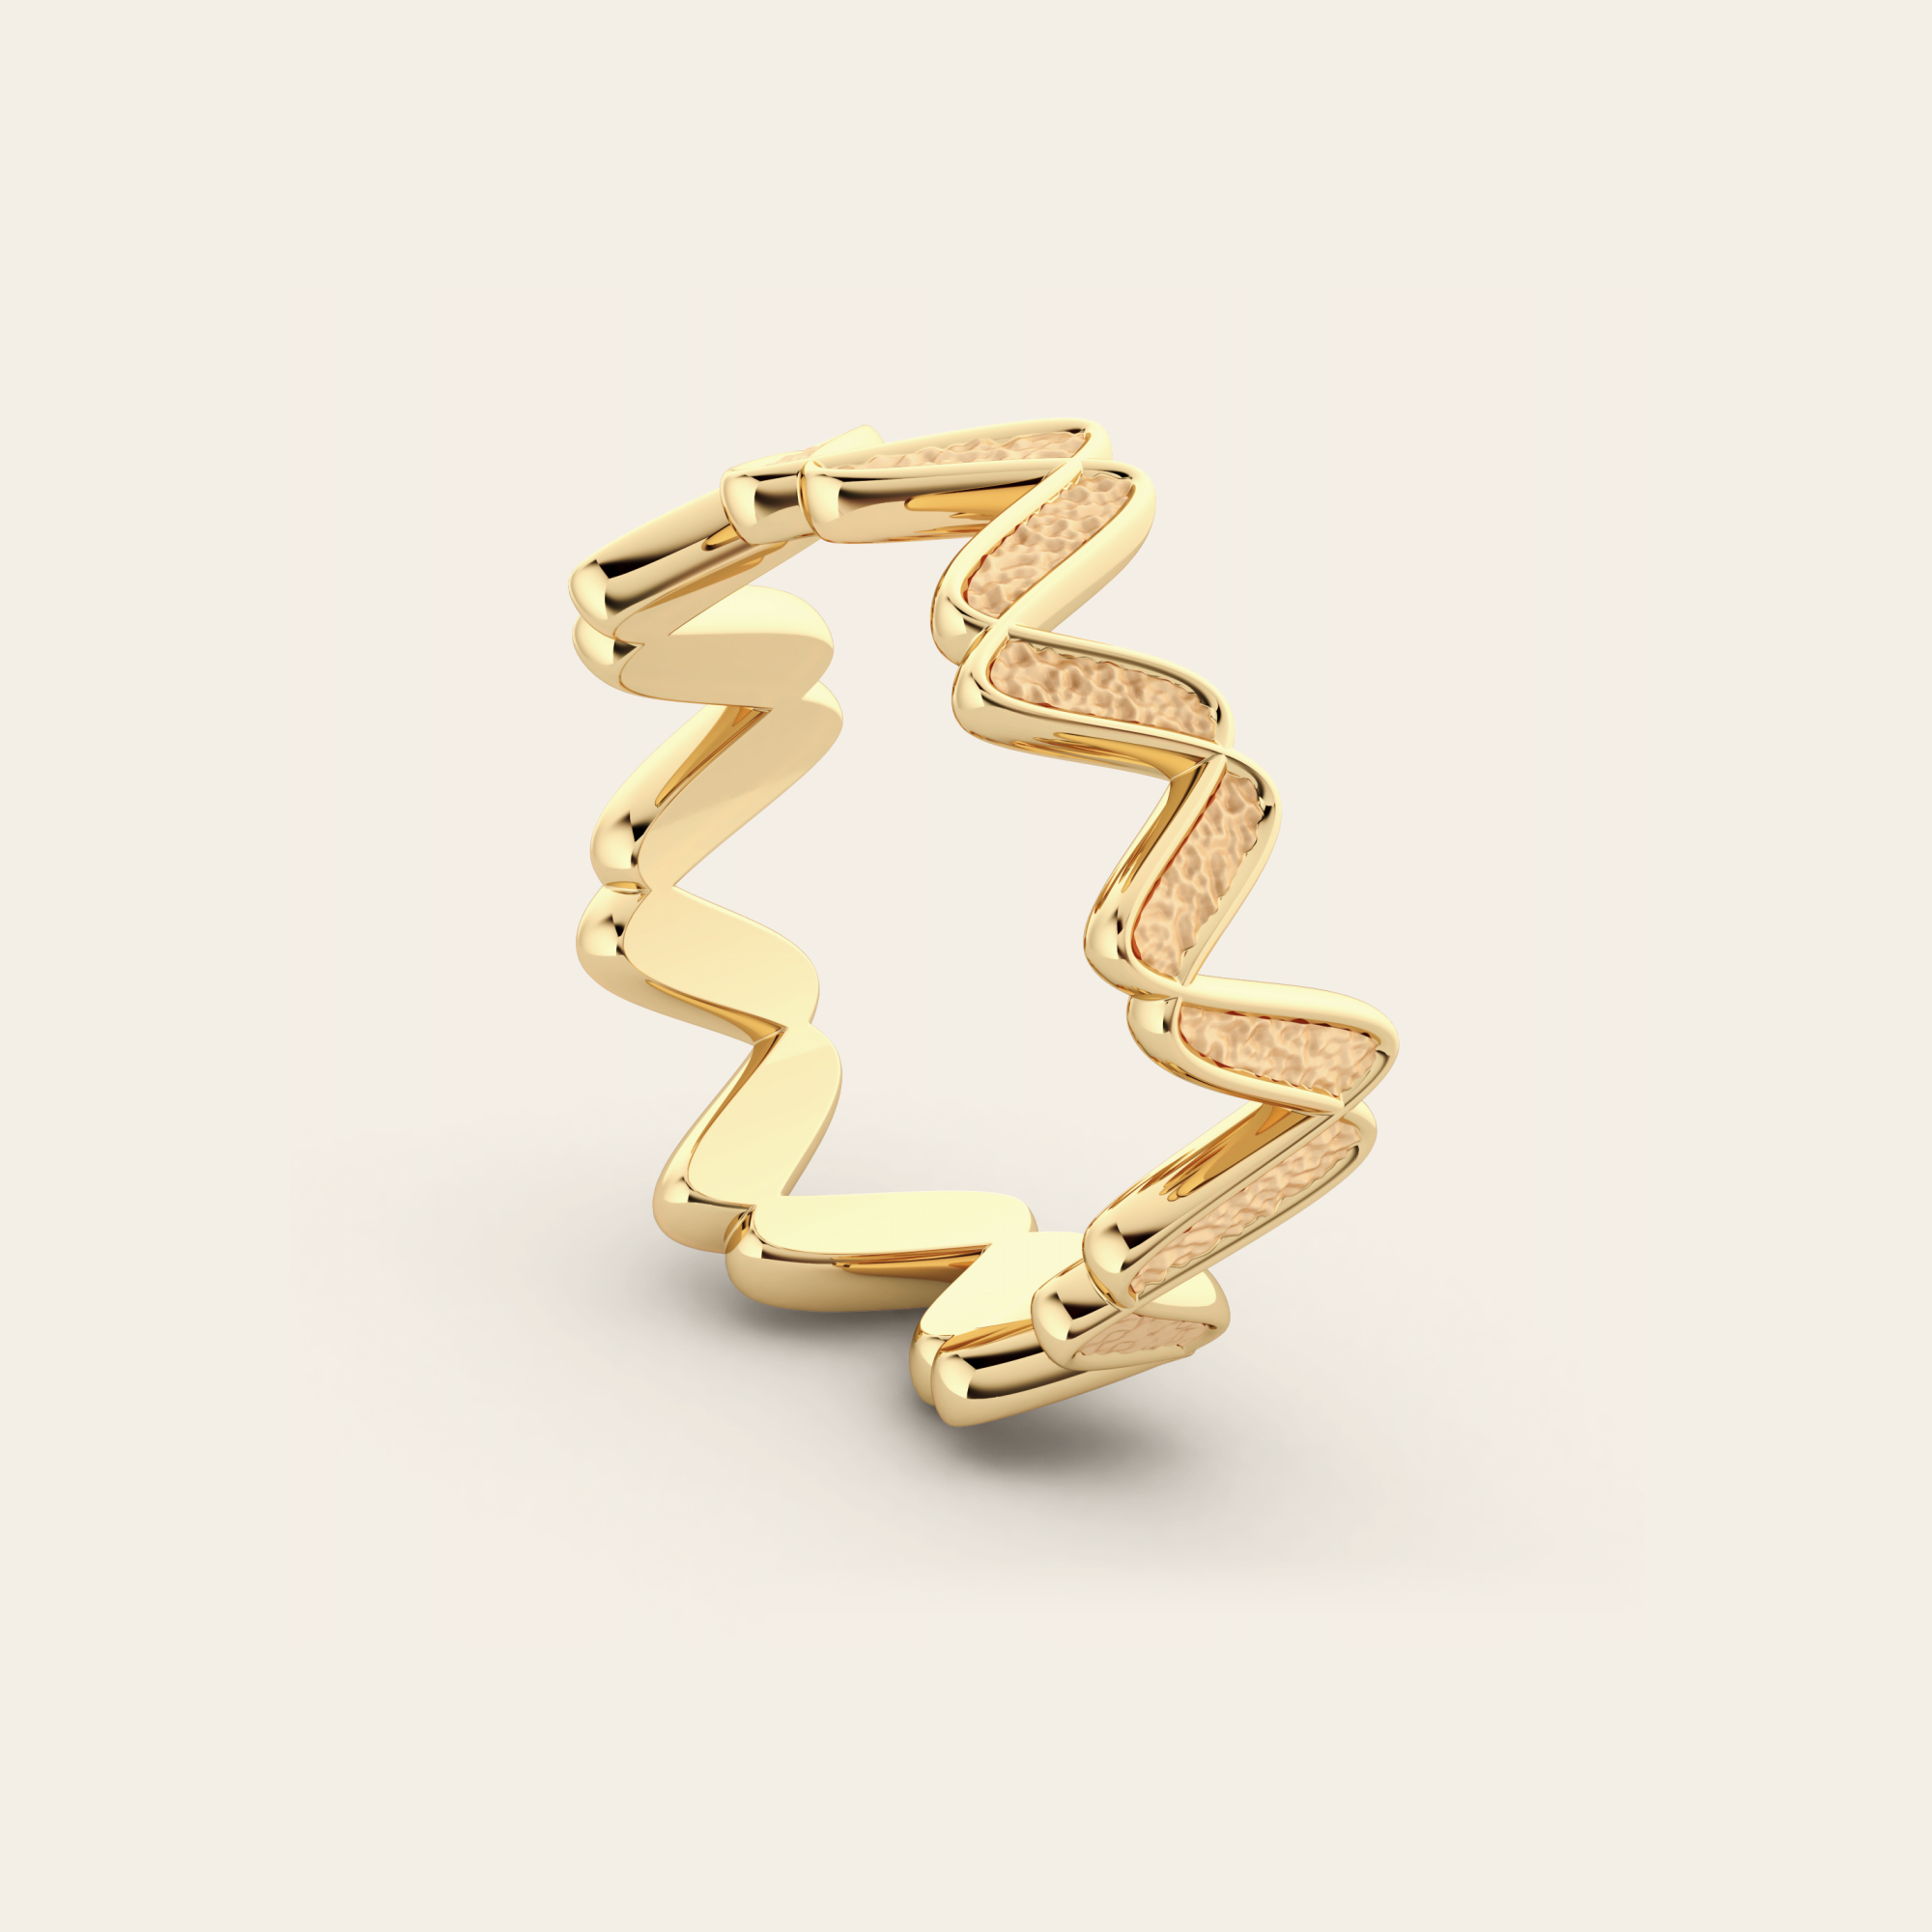 Single Cadence Ring in 18k Yellow Gold